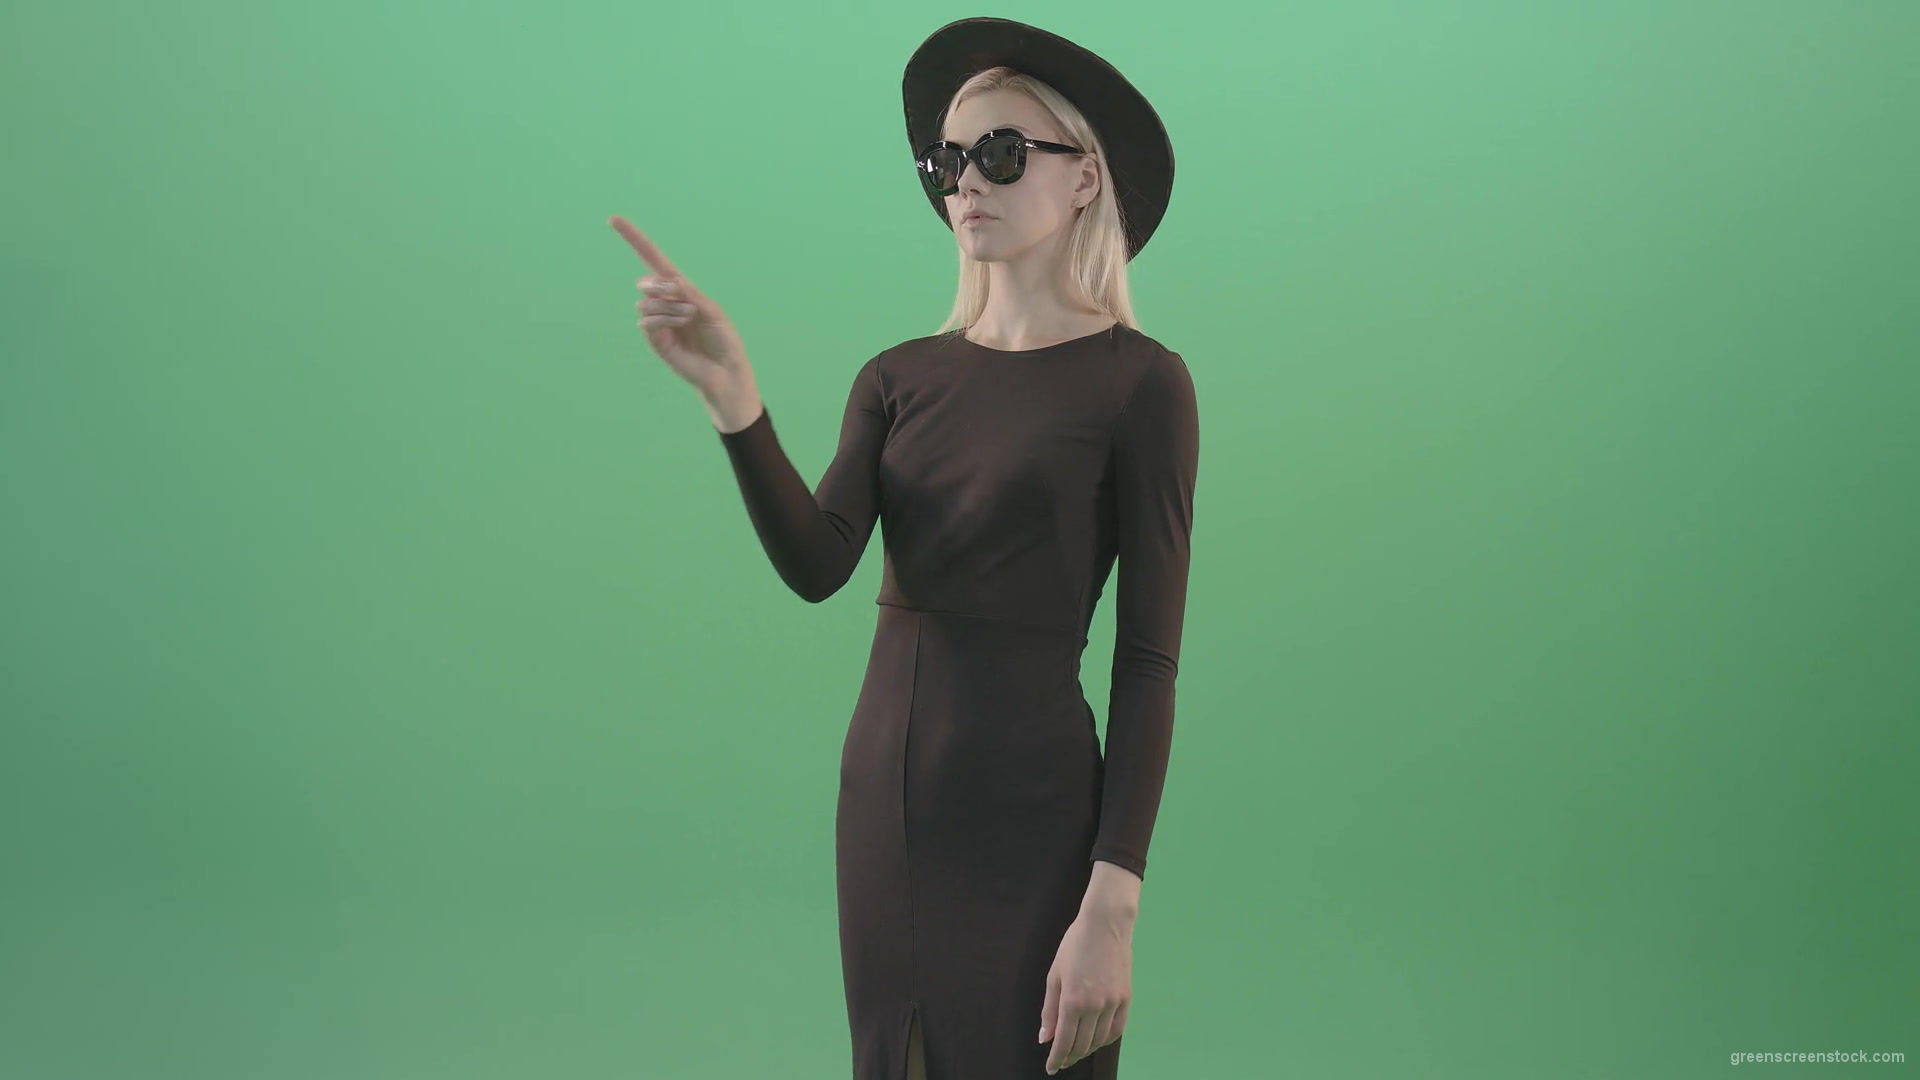 Awesome-beautiful-luxury-women-in-black-dress-shopping-virtual-products-on-touch-screen-4K-Green-Screen-Video-Footage-1920_002 Green Screen Stock